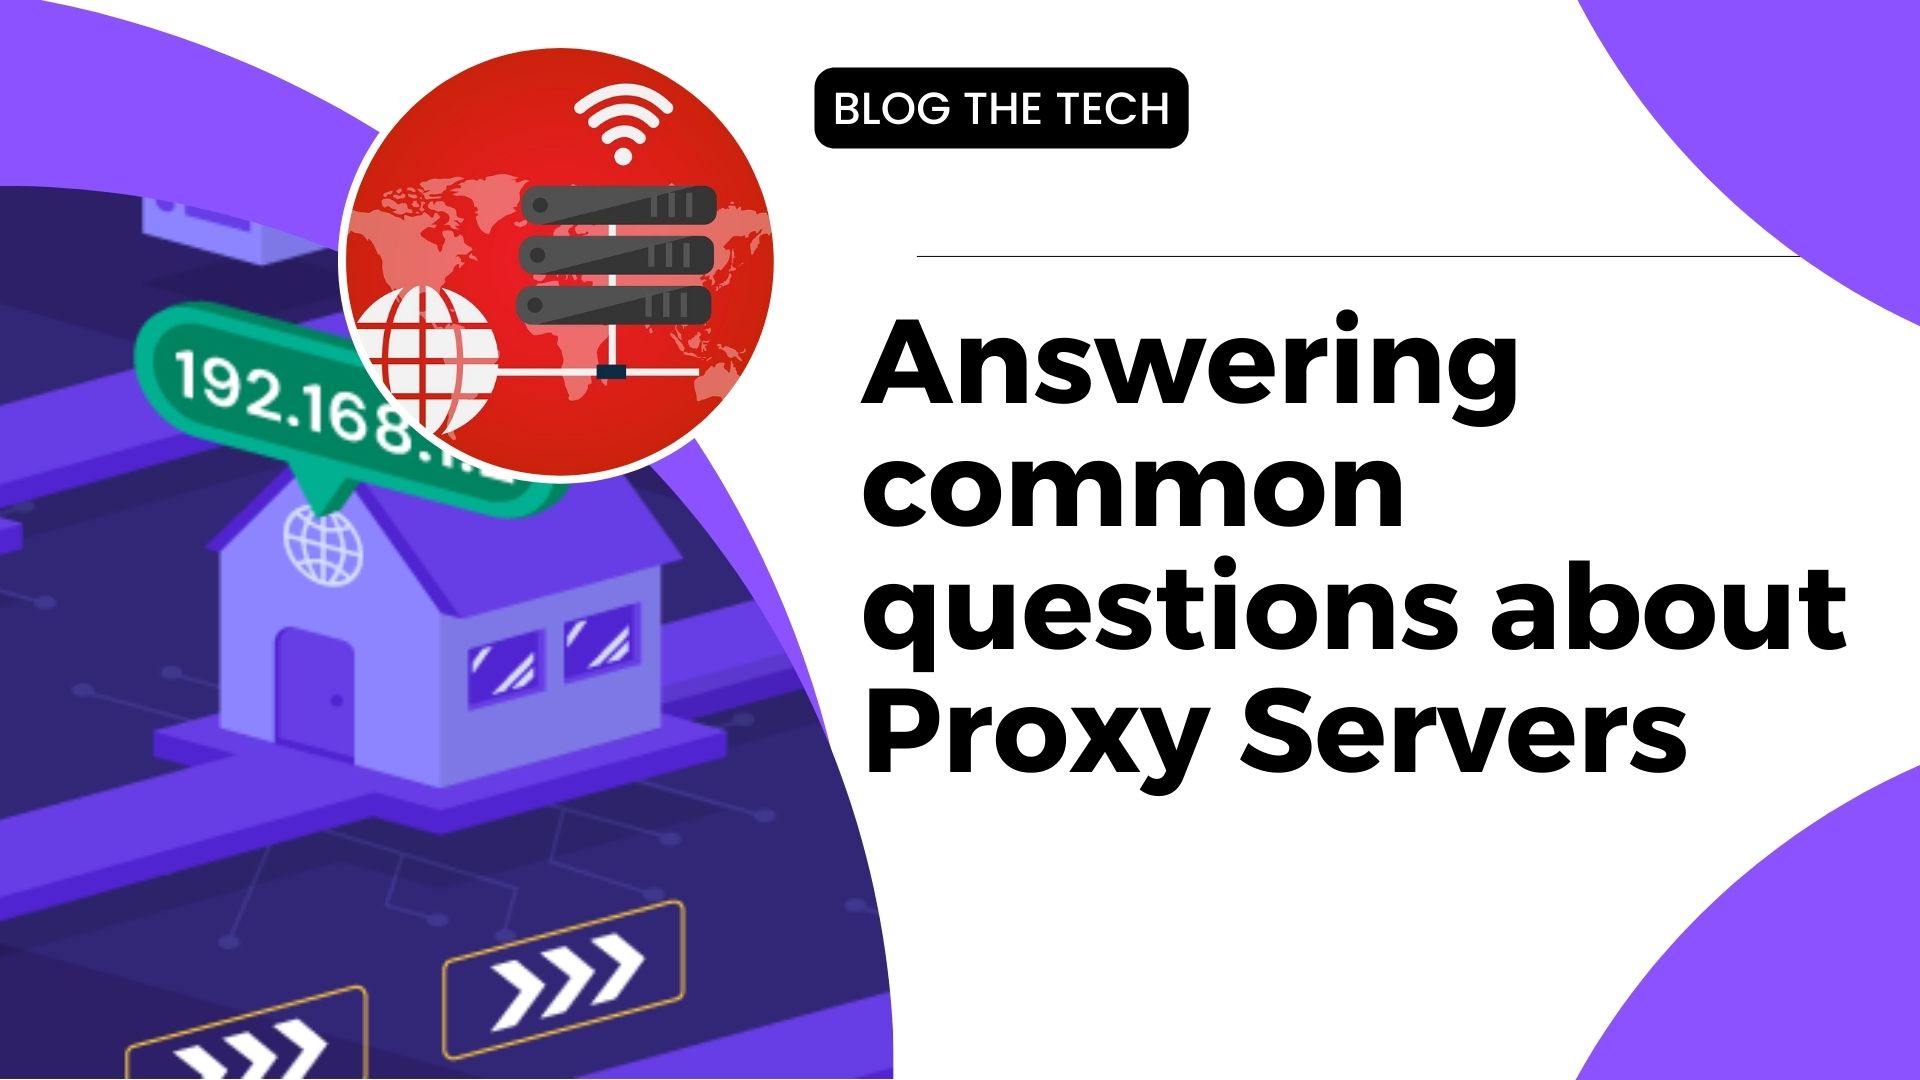 Answering common questions about Proxy Servers